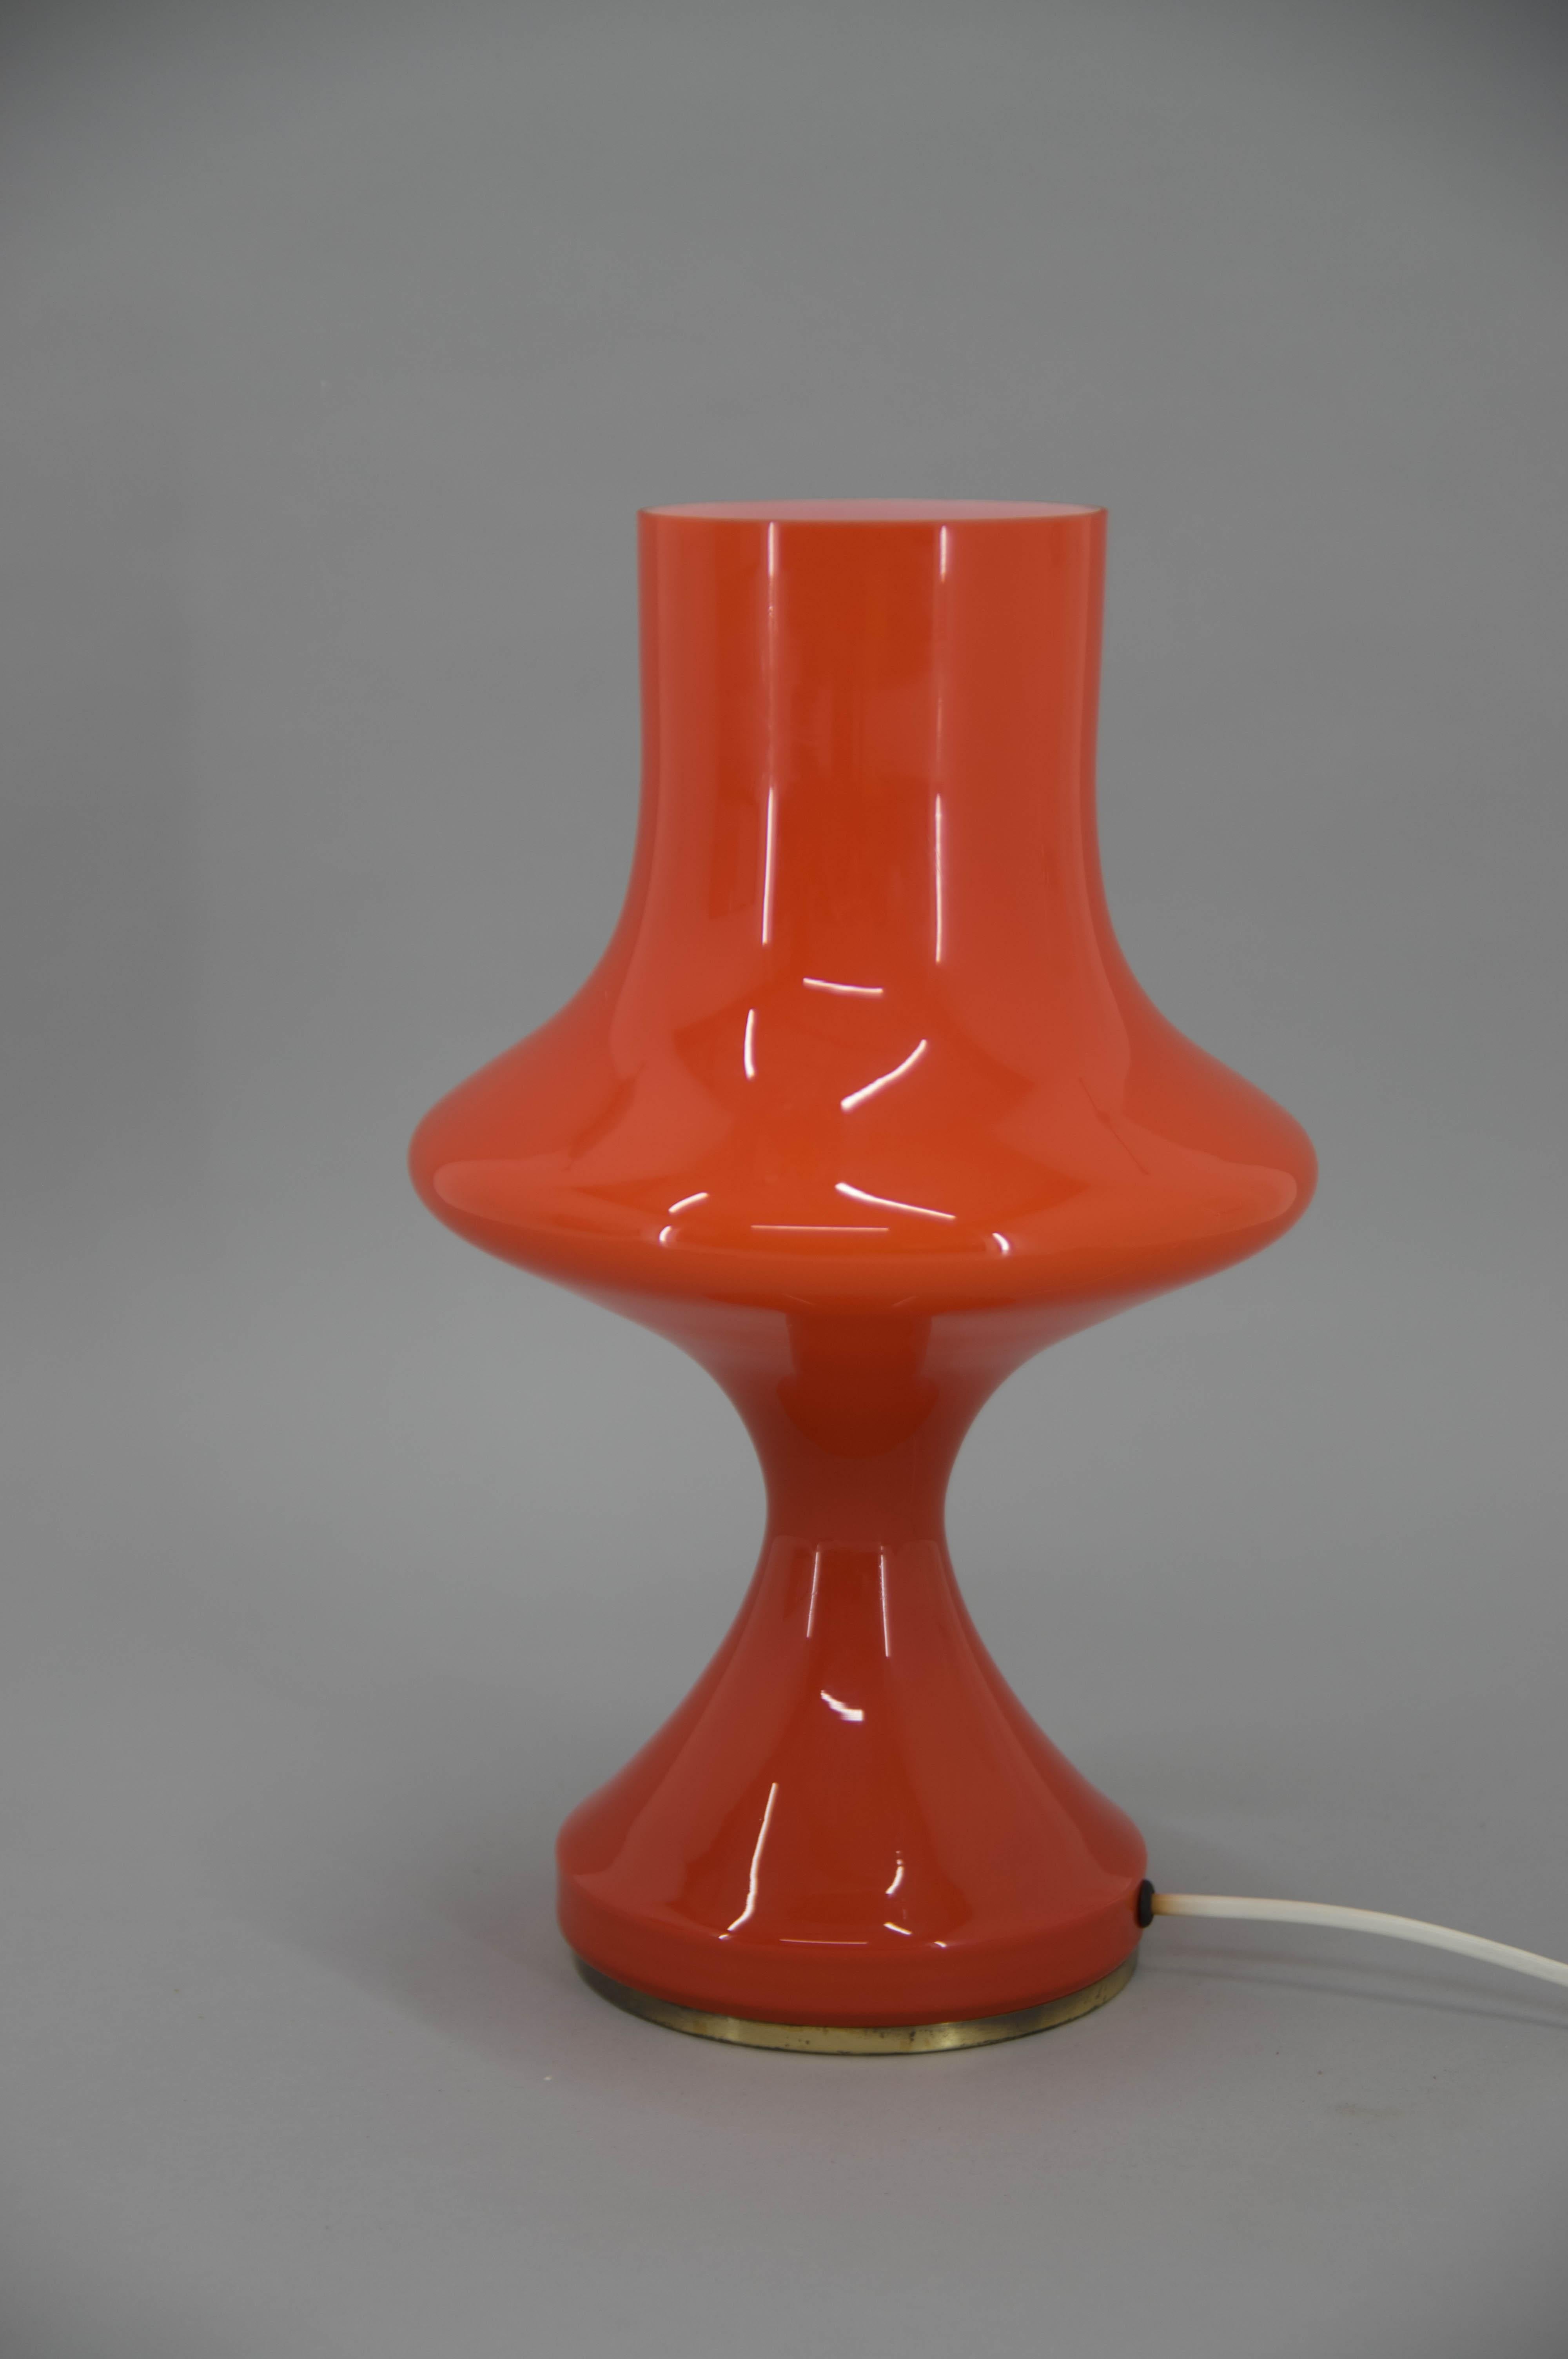 Red glass table lamp designed by Stepan Tabera for Czechoslovakian company OPP Jihlava in early 1970s. Two layers of glass - white inside and red outside. Bottom base made of brass.
1x60W, E25-E27 bulb
US plug adapter included.